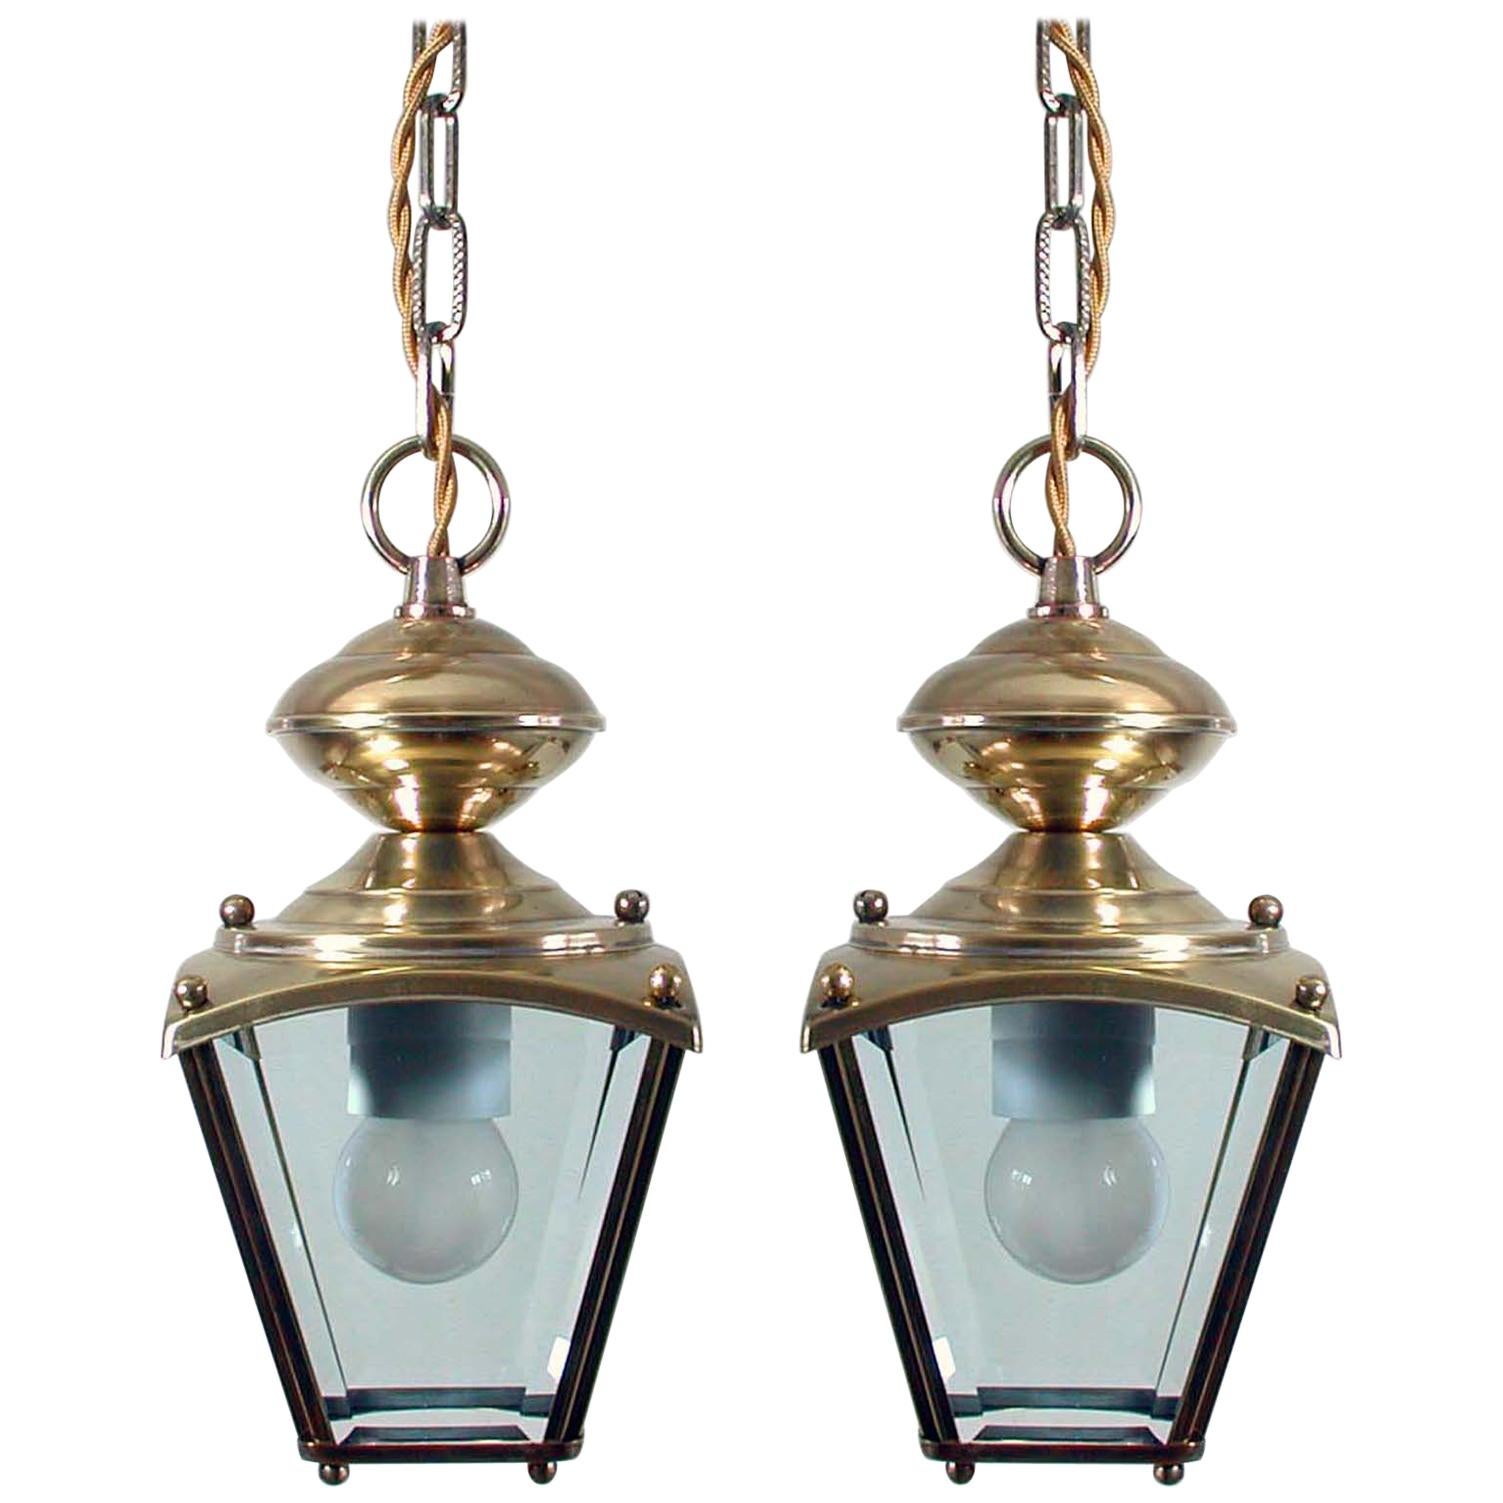 French Art Deco Brass and Bevelled Glass Lantern Pendant, Set of 2, 1930s